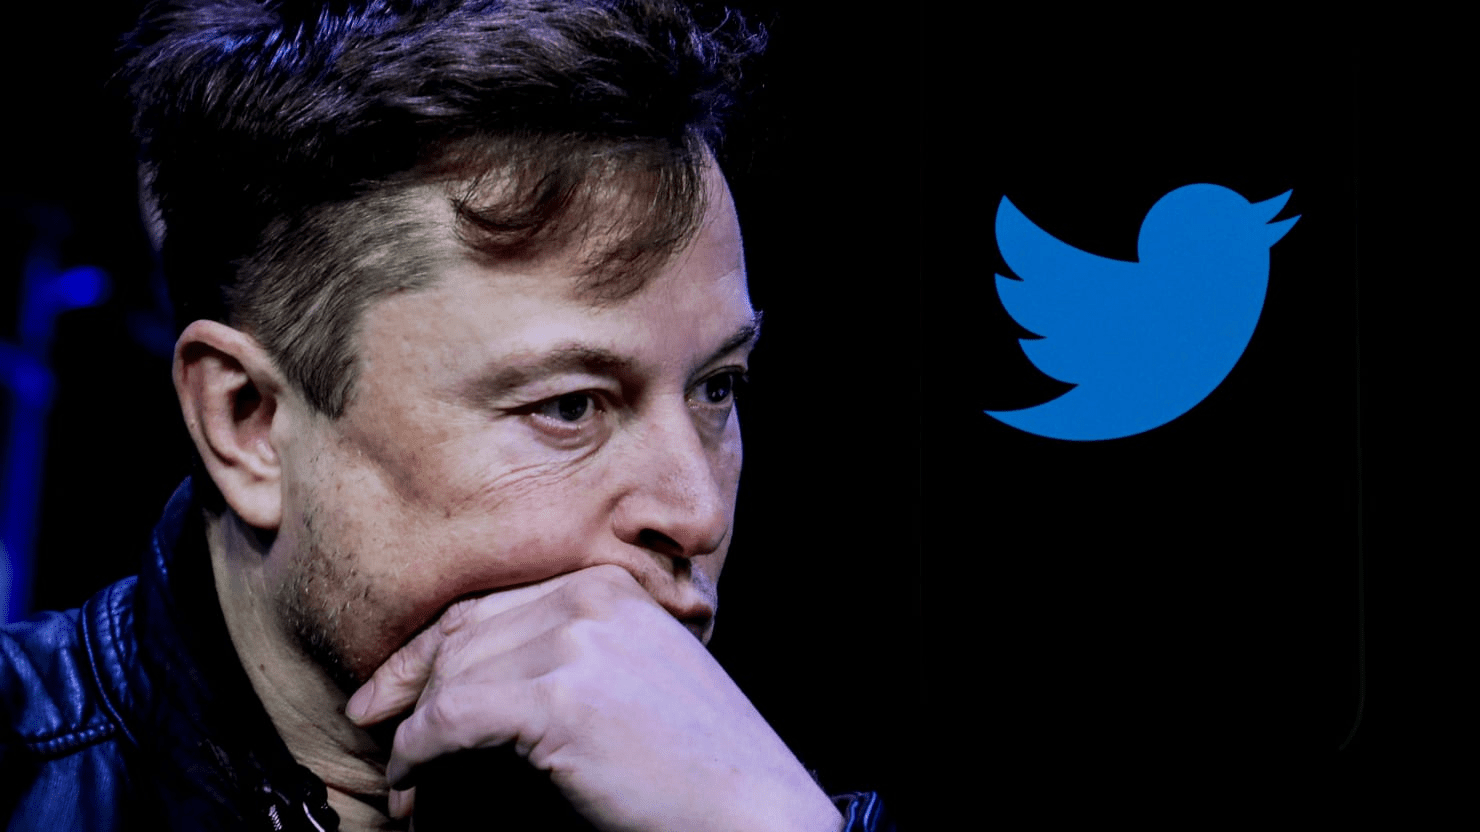 Elon Musk's style has made Twitter more dangerous, former top official explains 